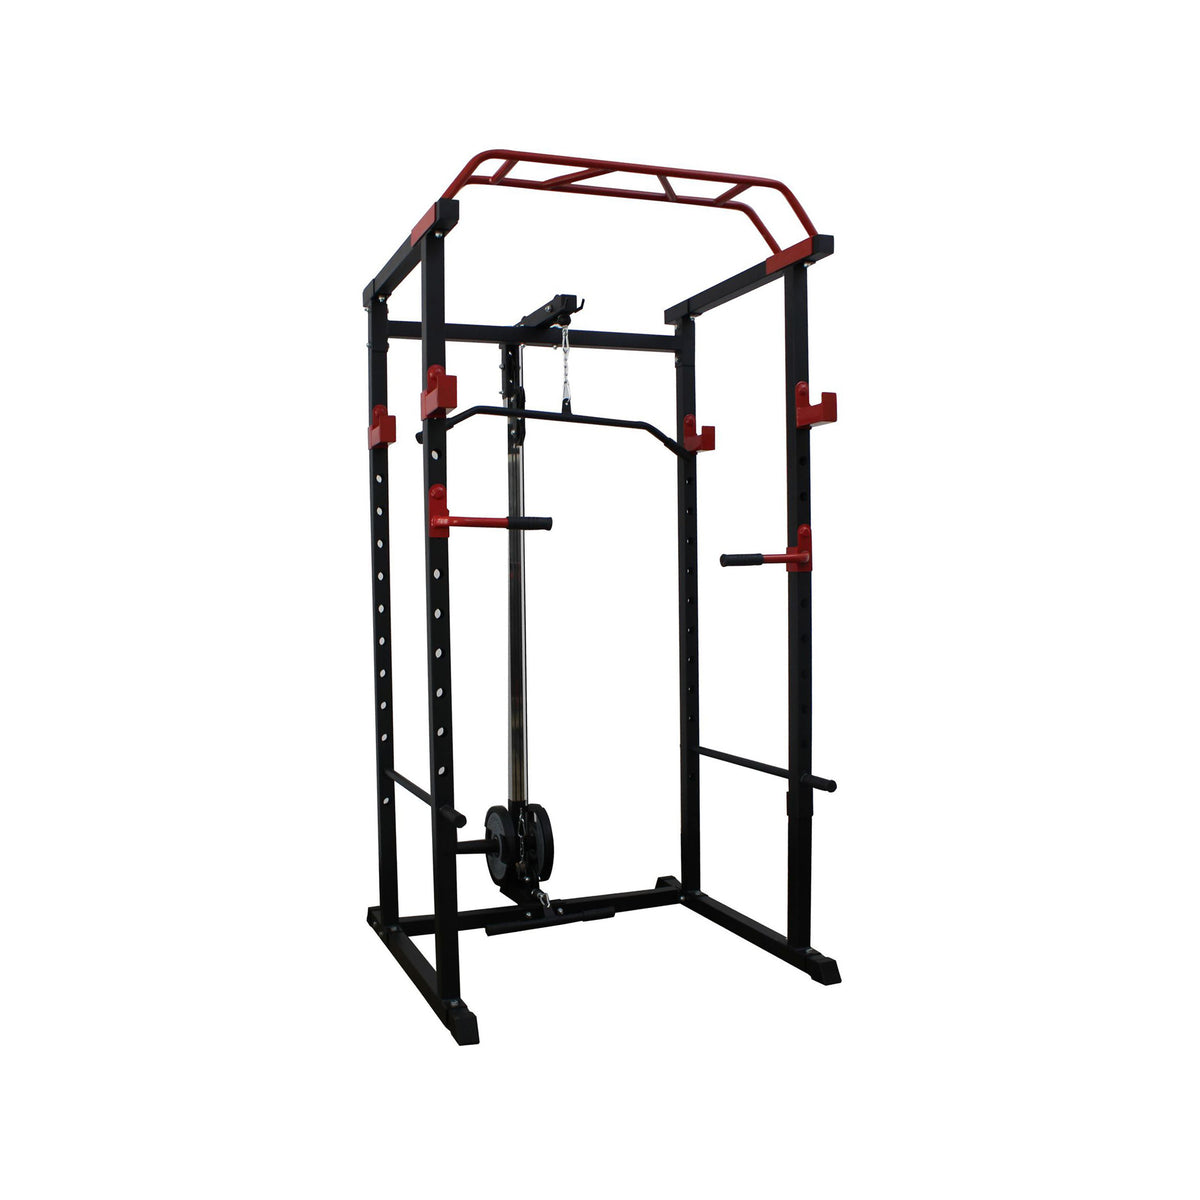 Silverback Power Rack with Lat Pulldown and Low Row – silverbackgymsupplies